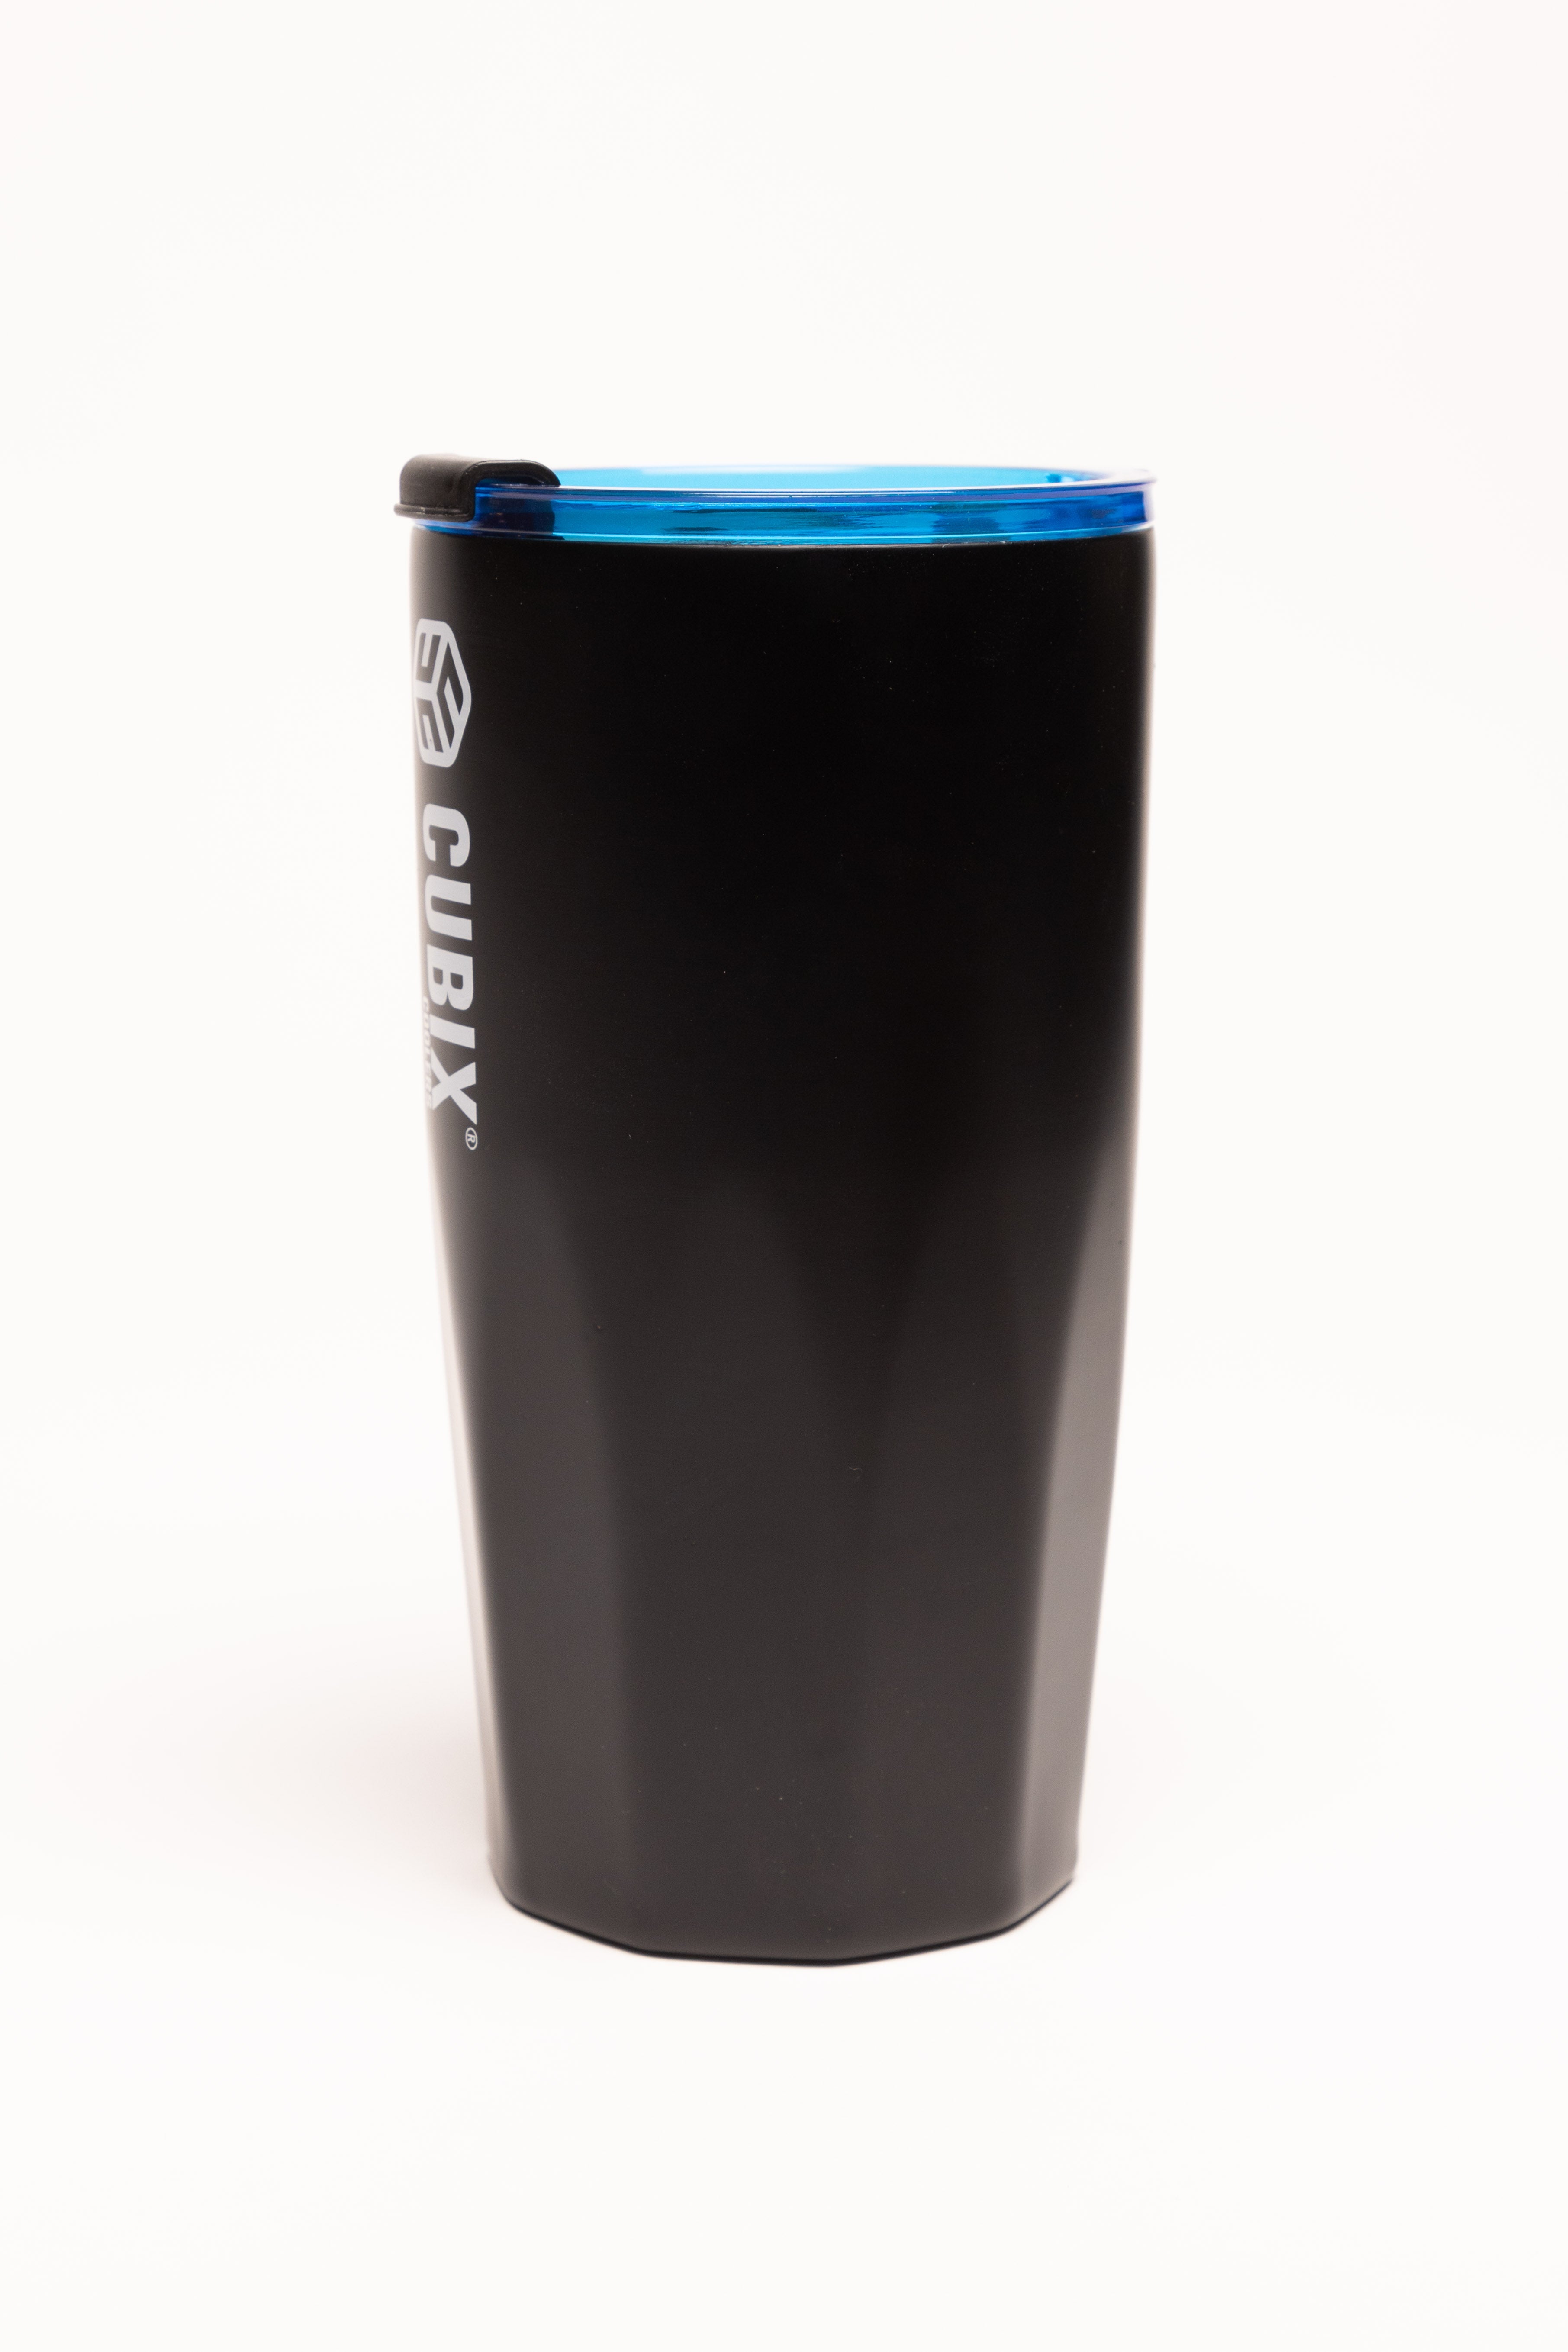 20 Ounce Tumbler - Insulated - Black with Blue Lid